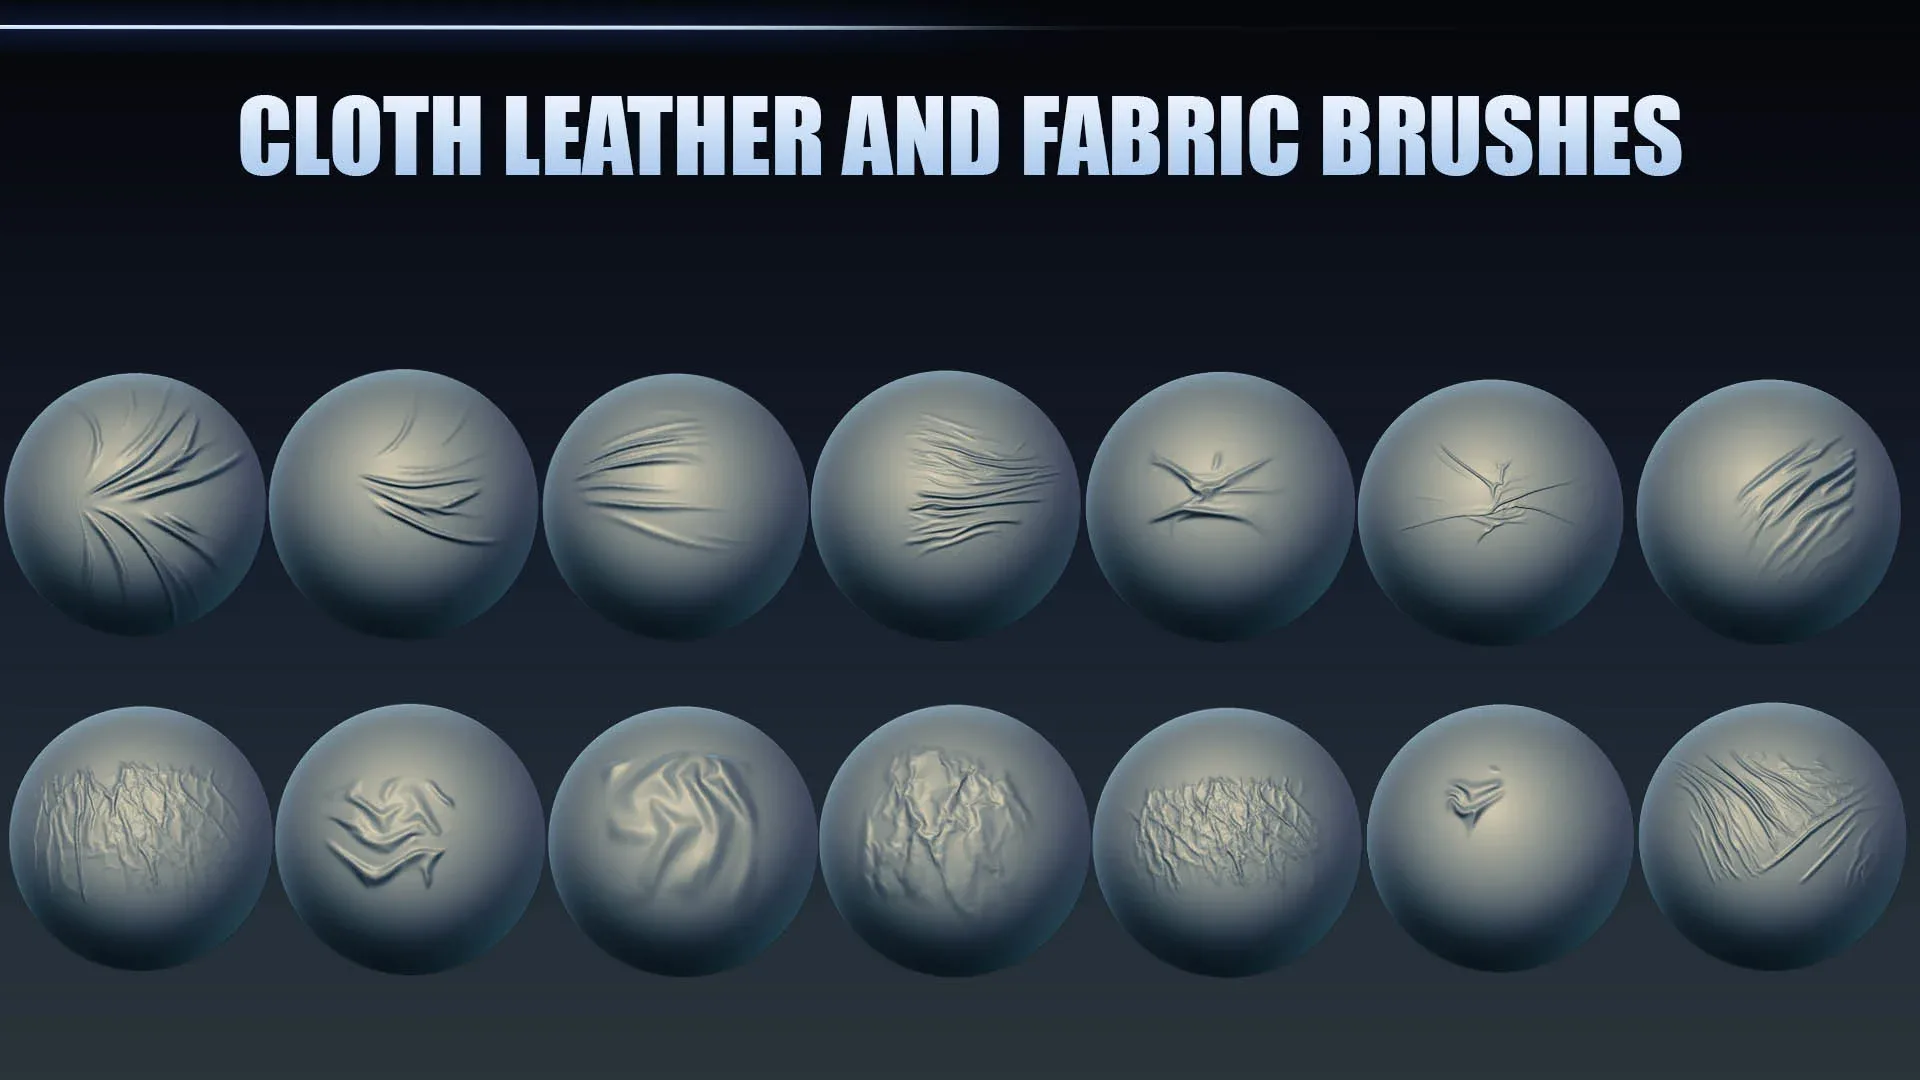 79 CLOTH LEATHER AND FABRIC BRUSHES - Tension & Compression Folds